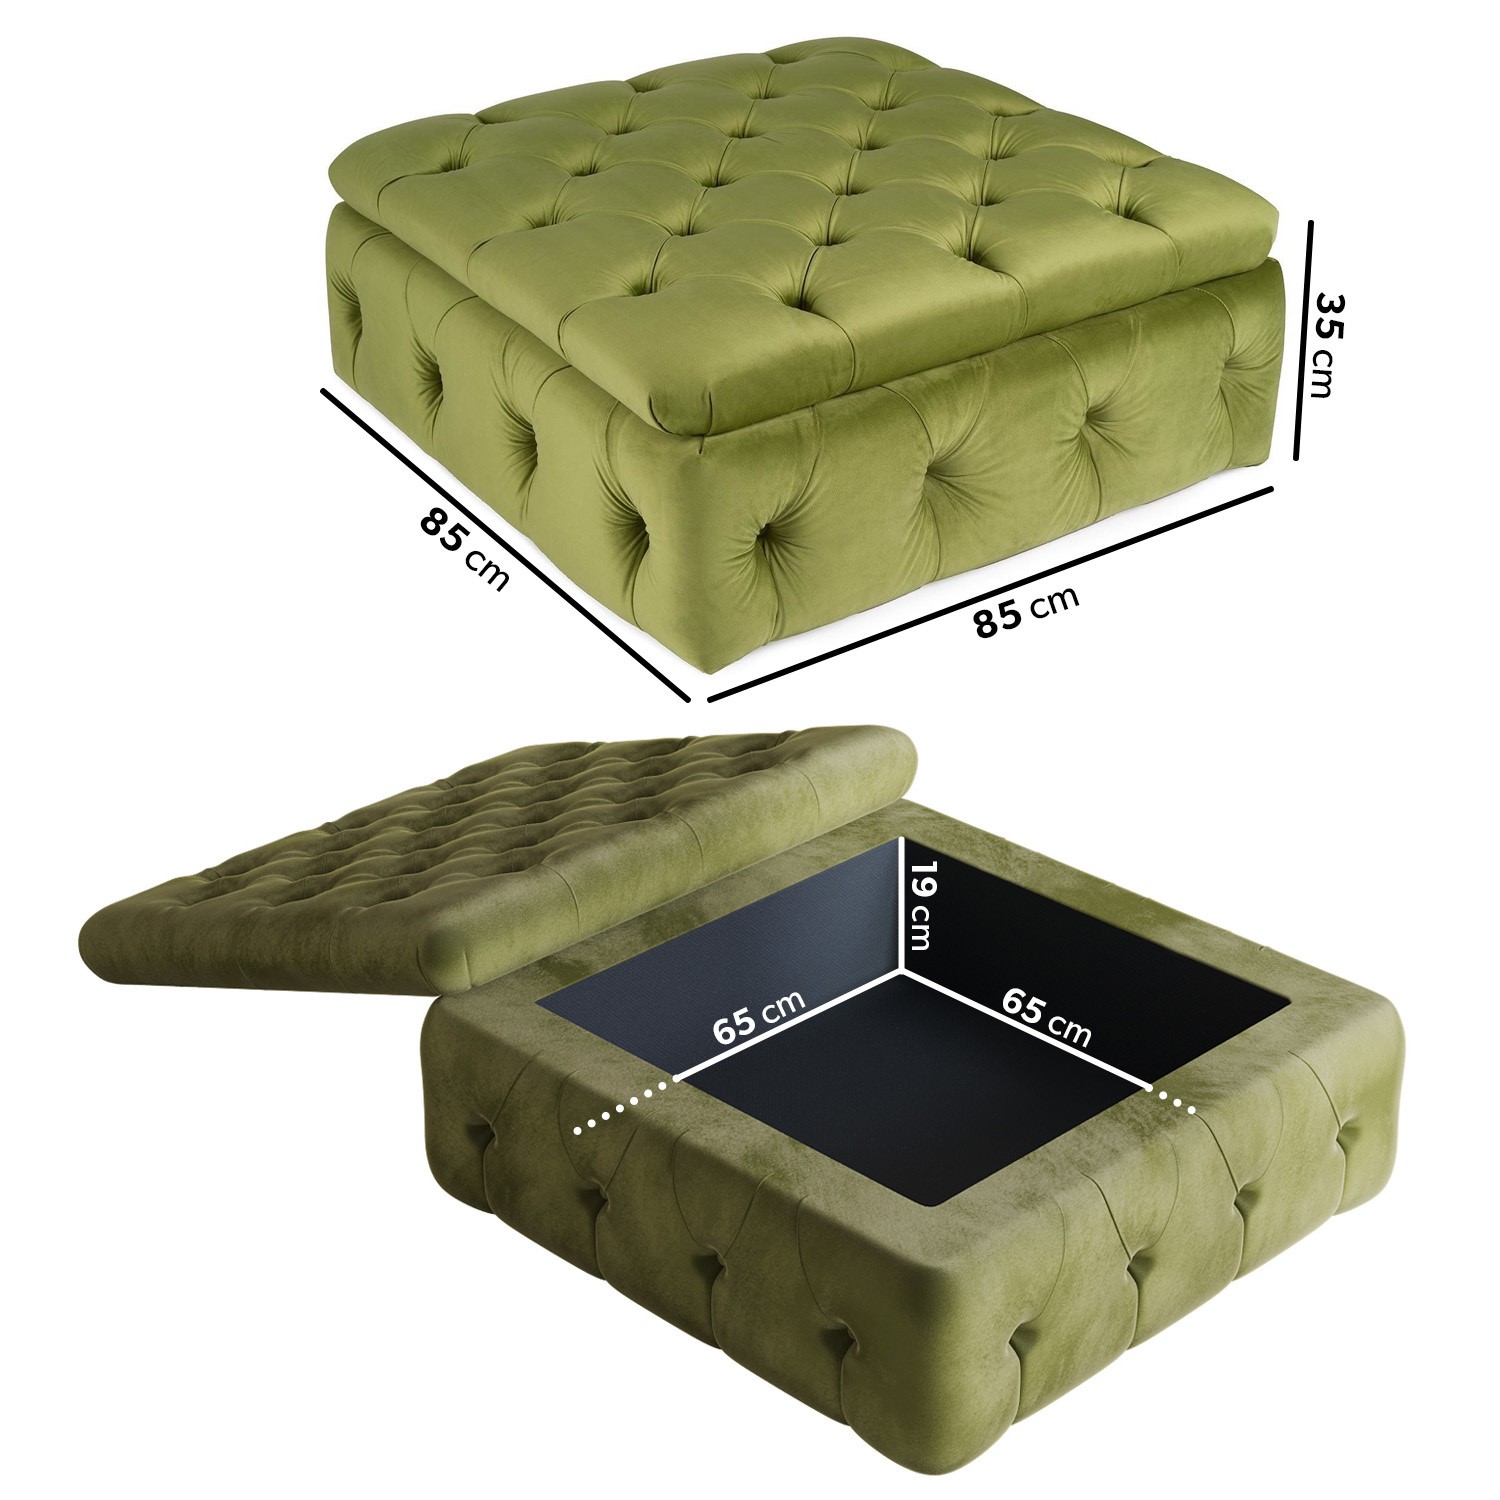 Read more about Large olive green velvet storage footstool payton